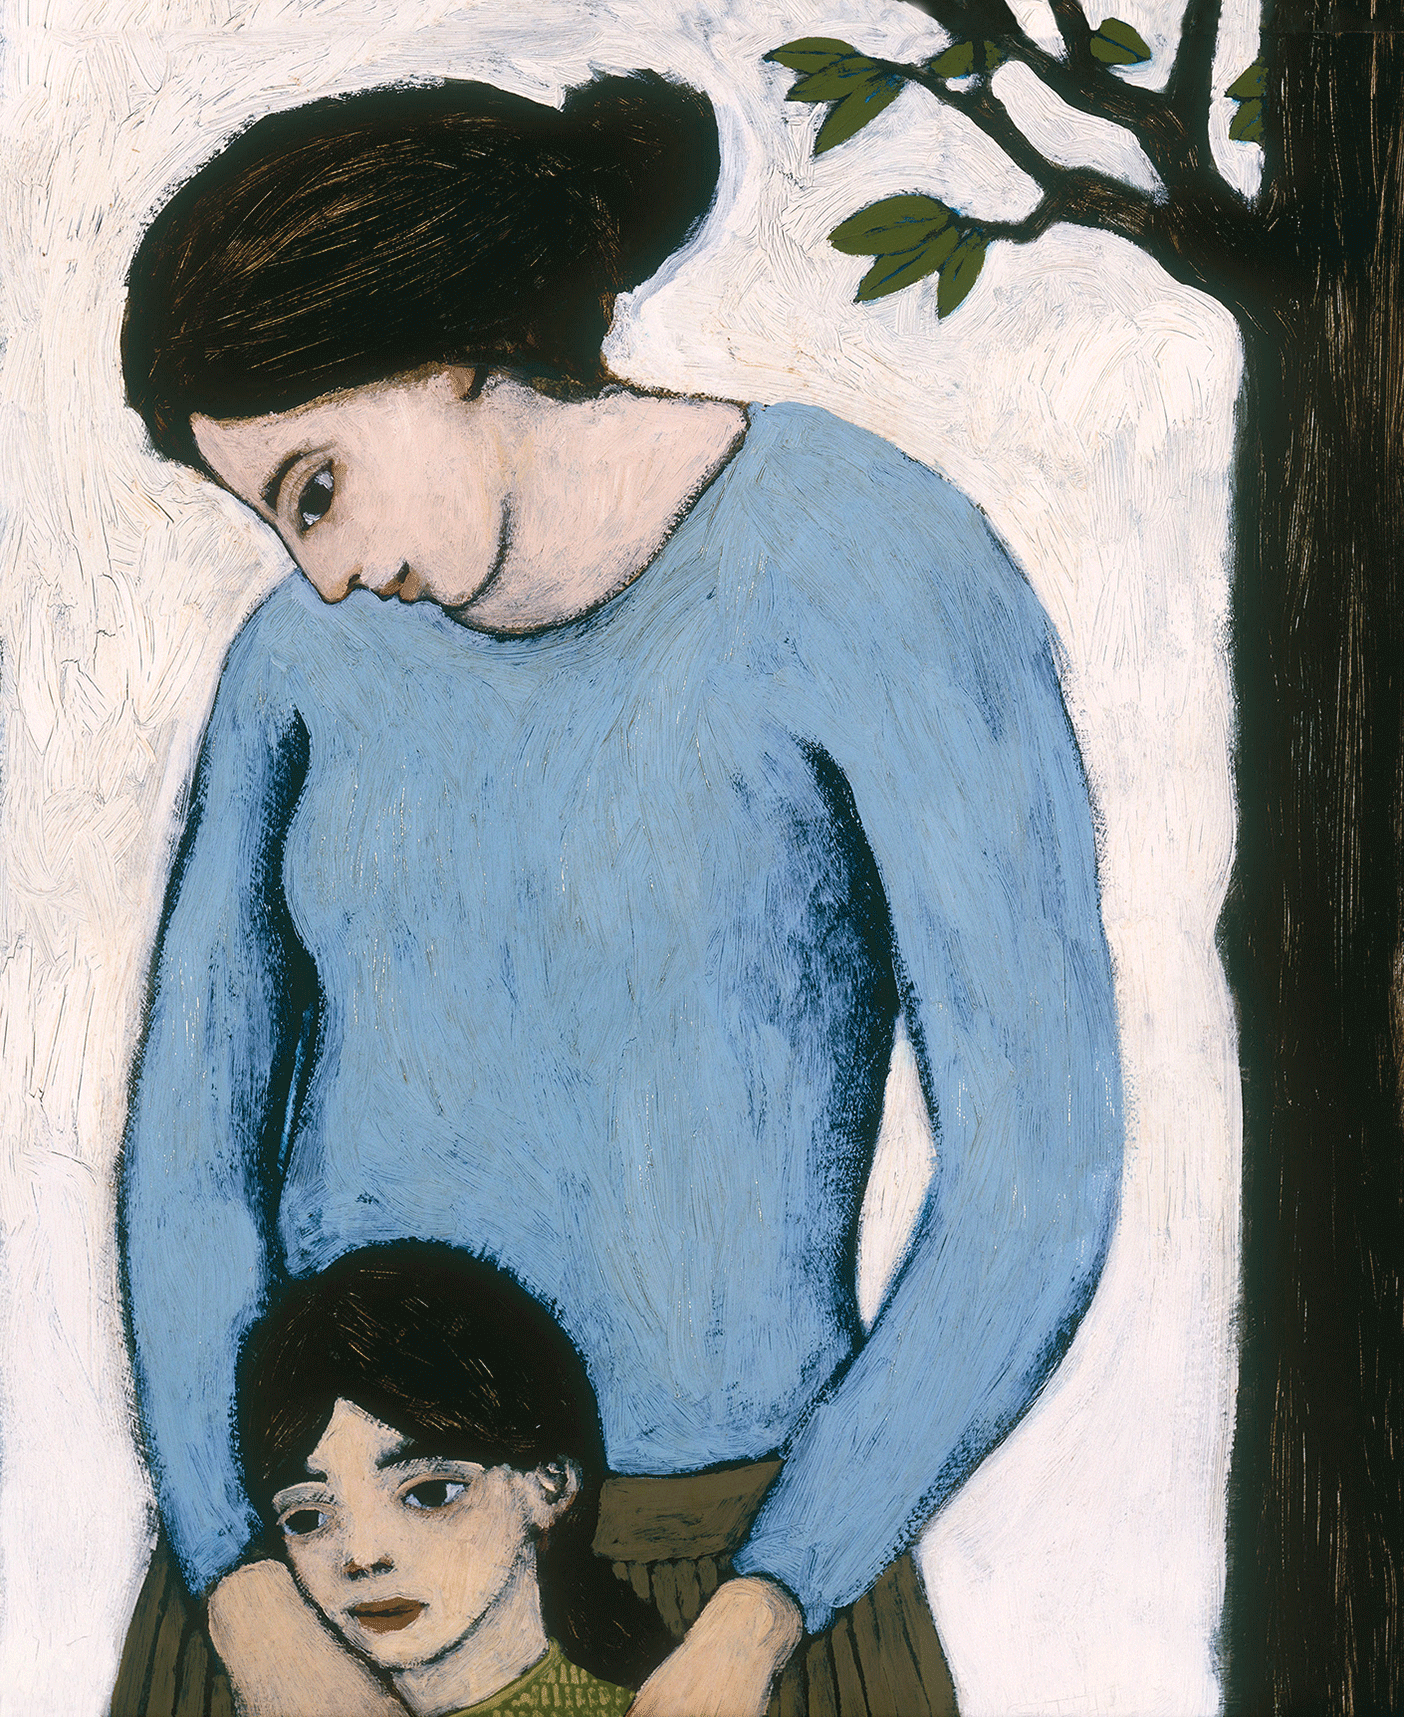 A painting of a mother standing behind her child, placing her arms on the child's shoulders.